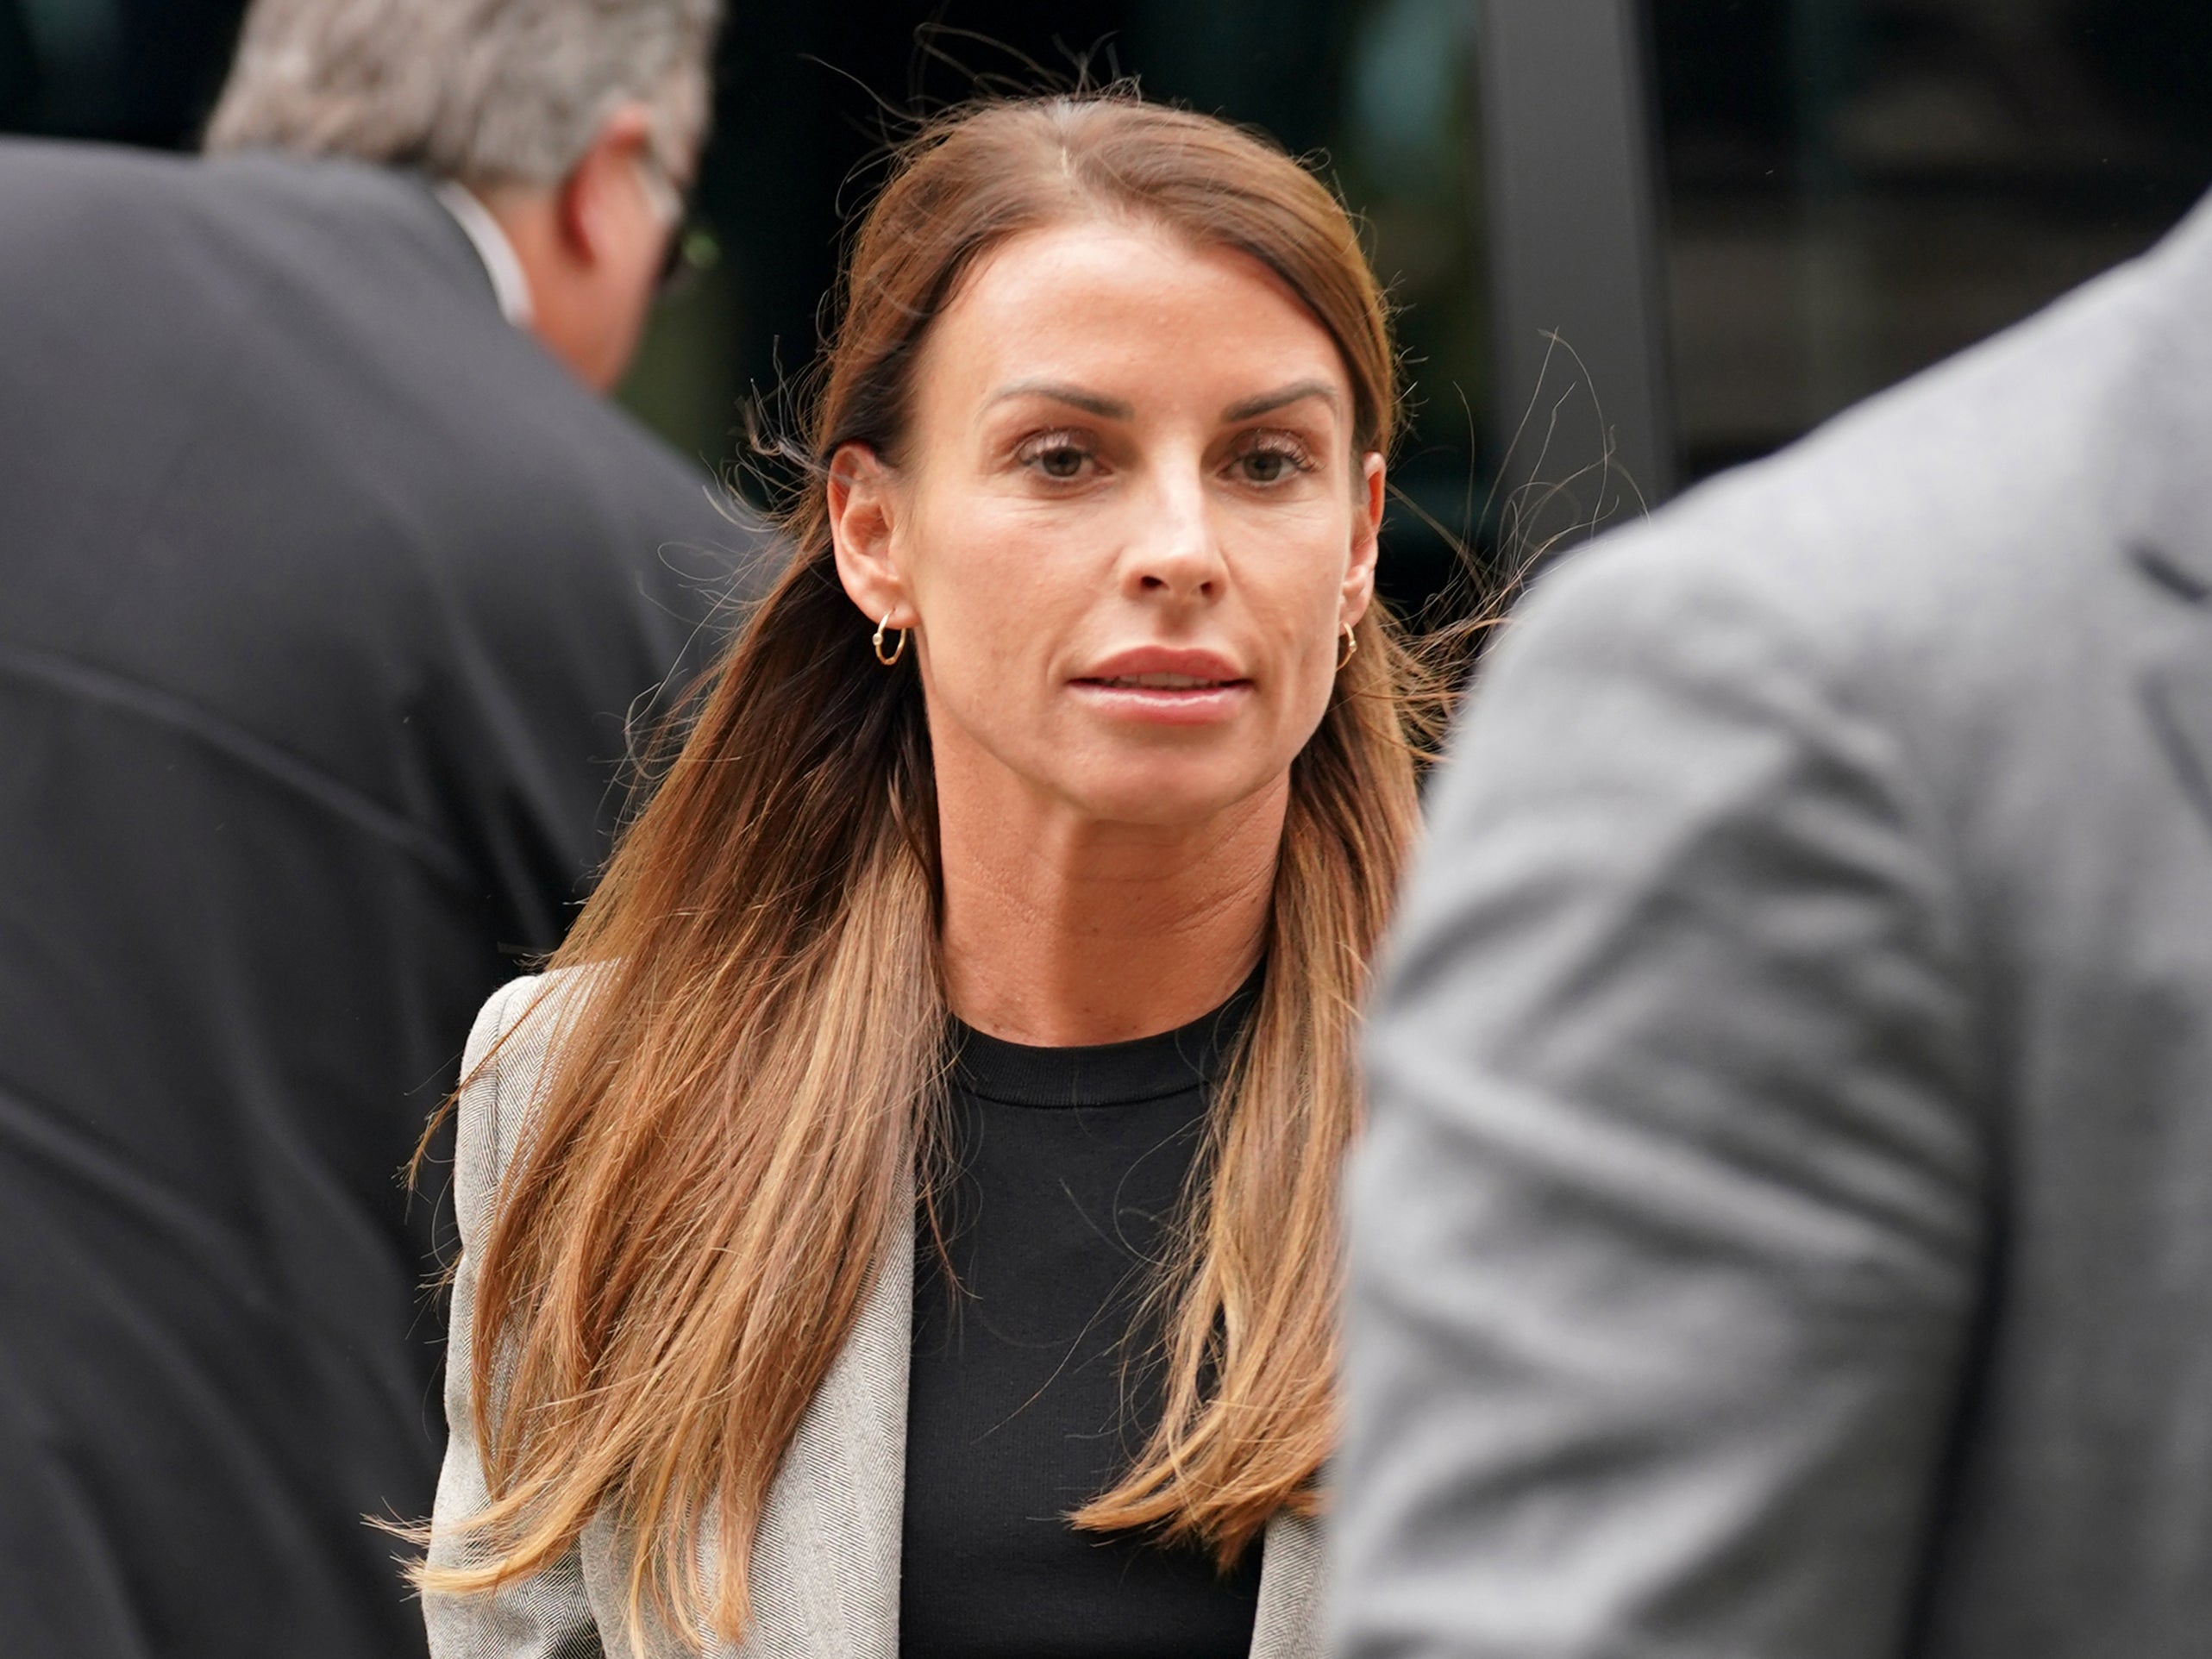 Coleen Rooney arrives at the Royal Courts Of Justice on Monday